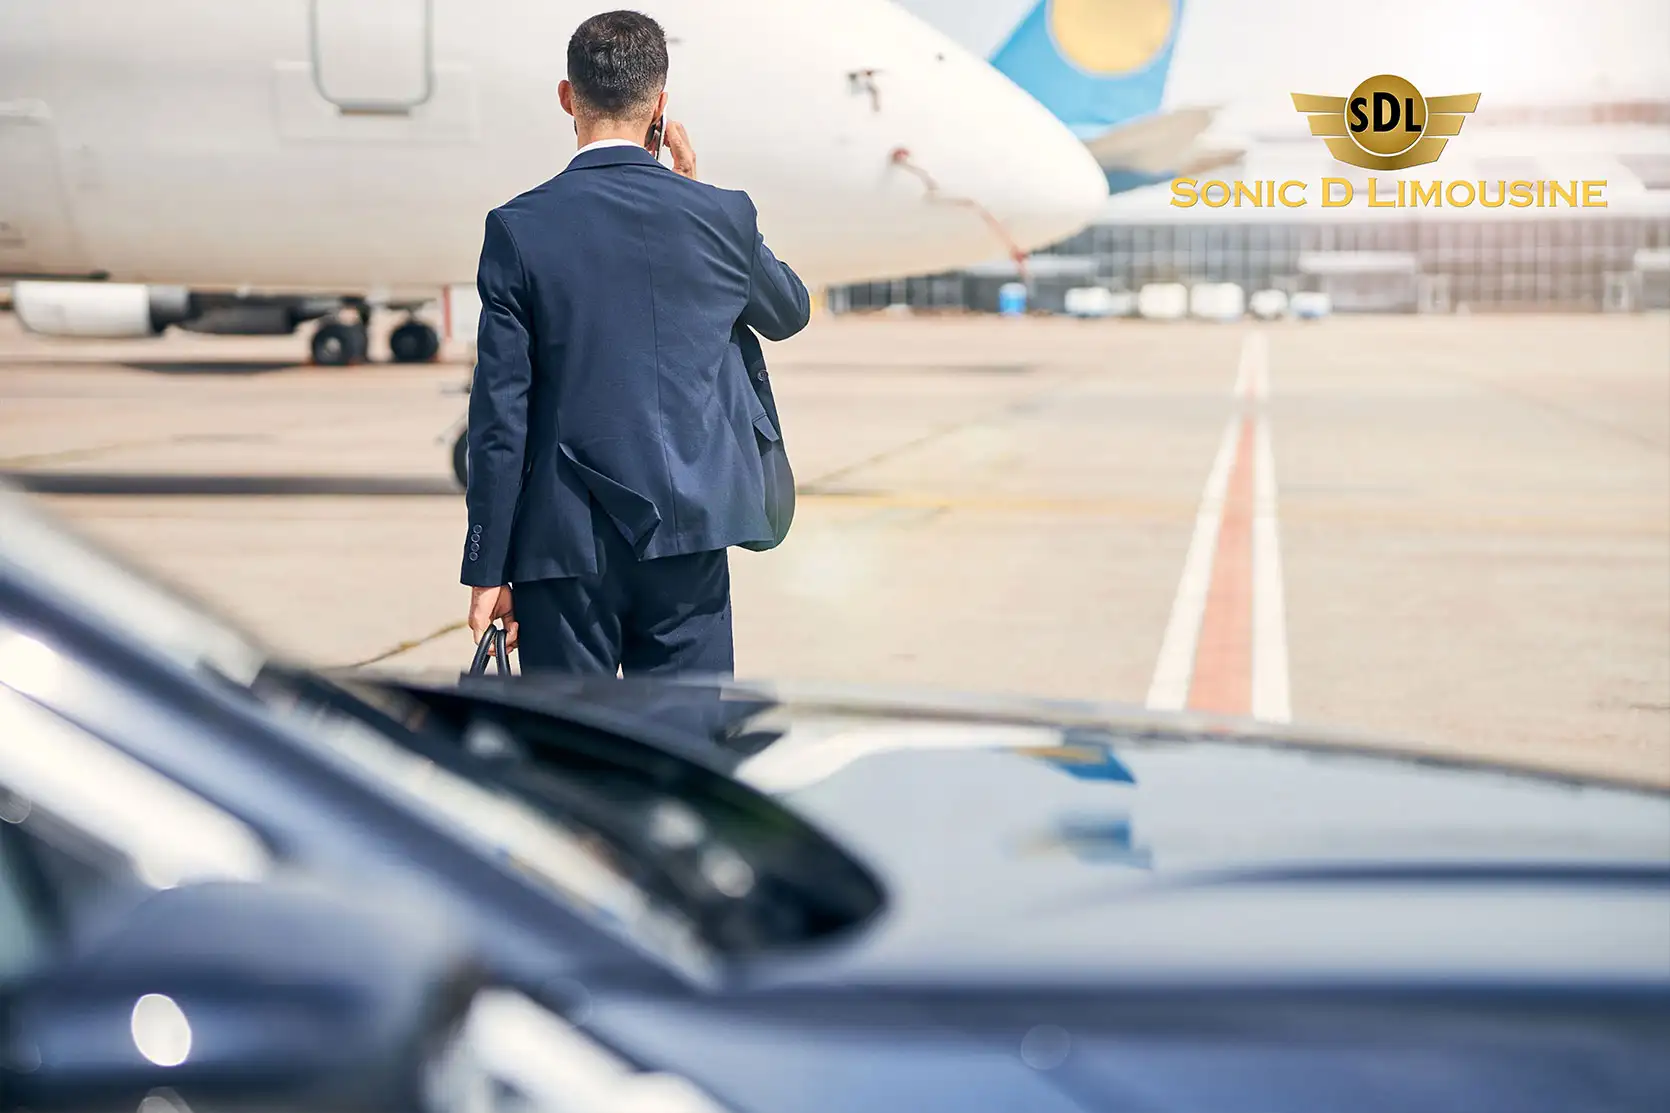 A man in a suit standing next to a car with an airplane in the background.